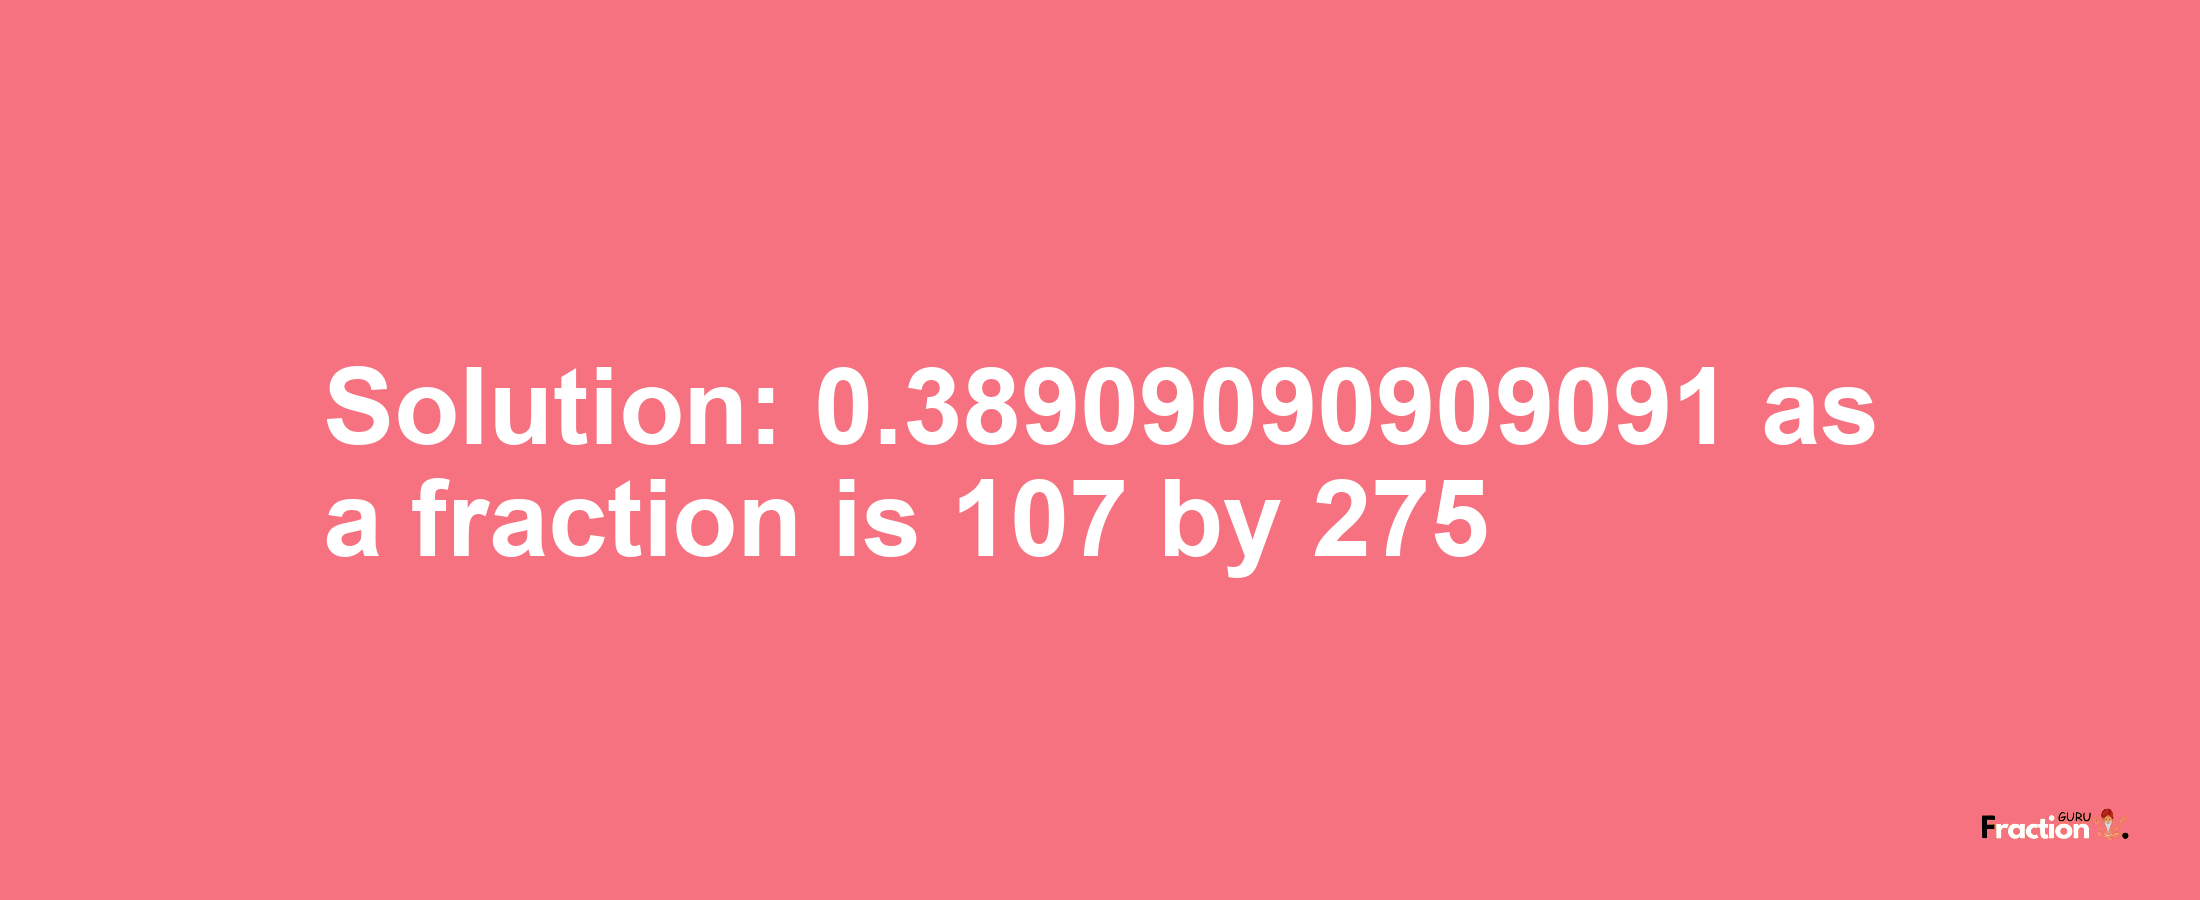 Solution:0.38909090909091 as a fraction is 107/275